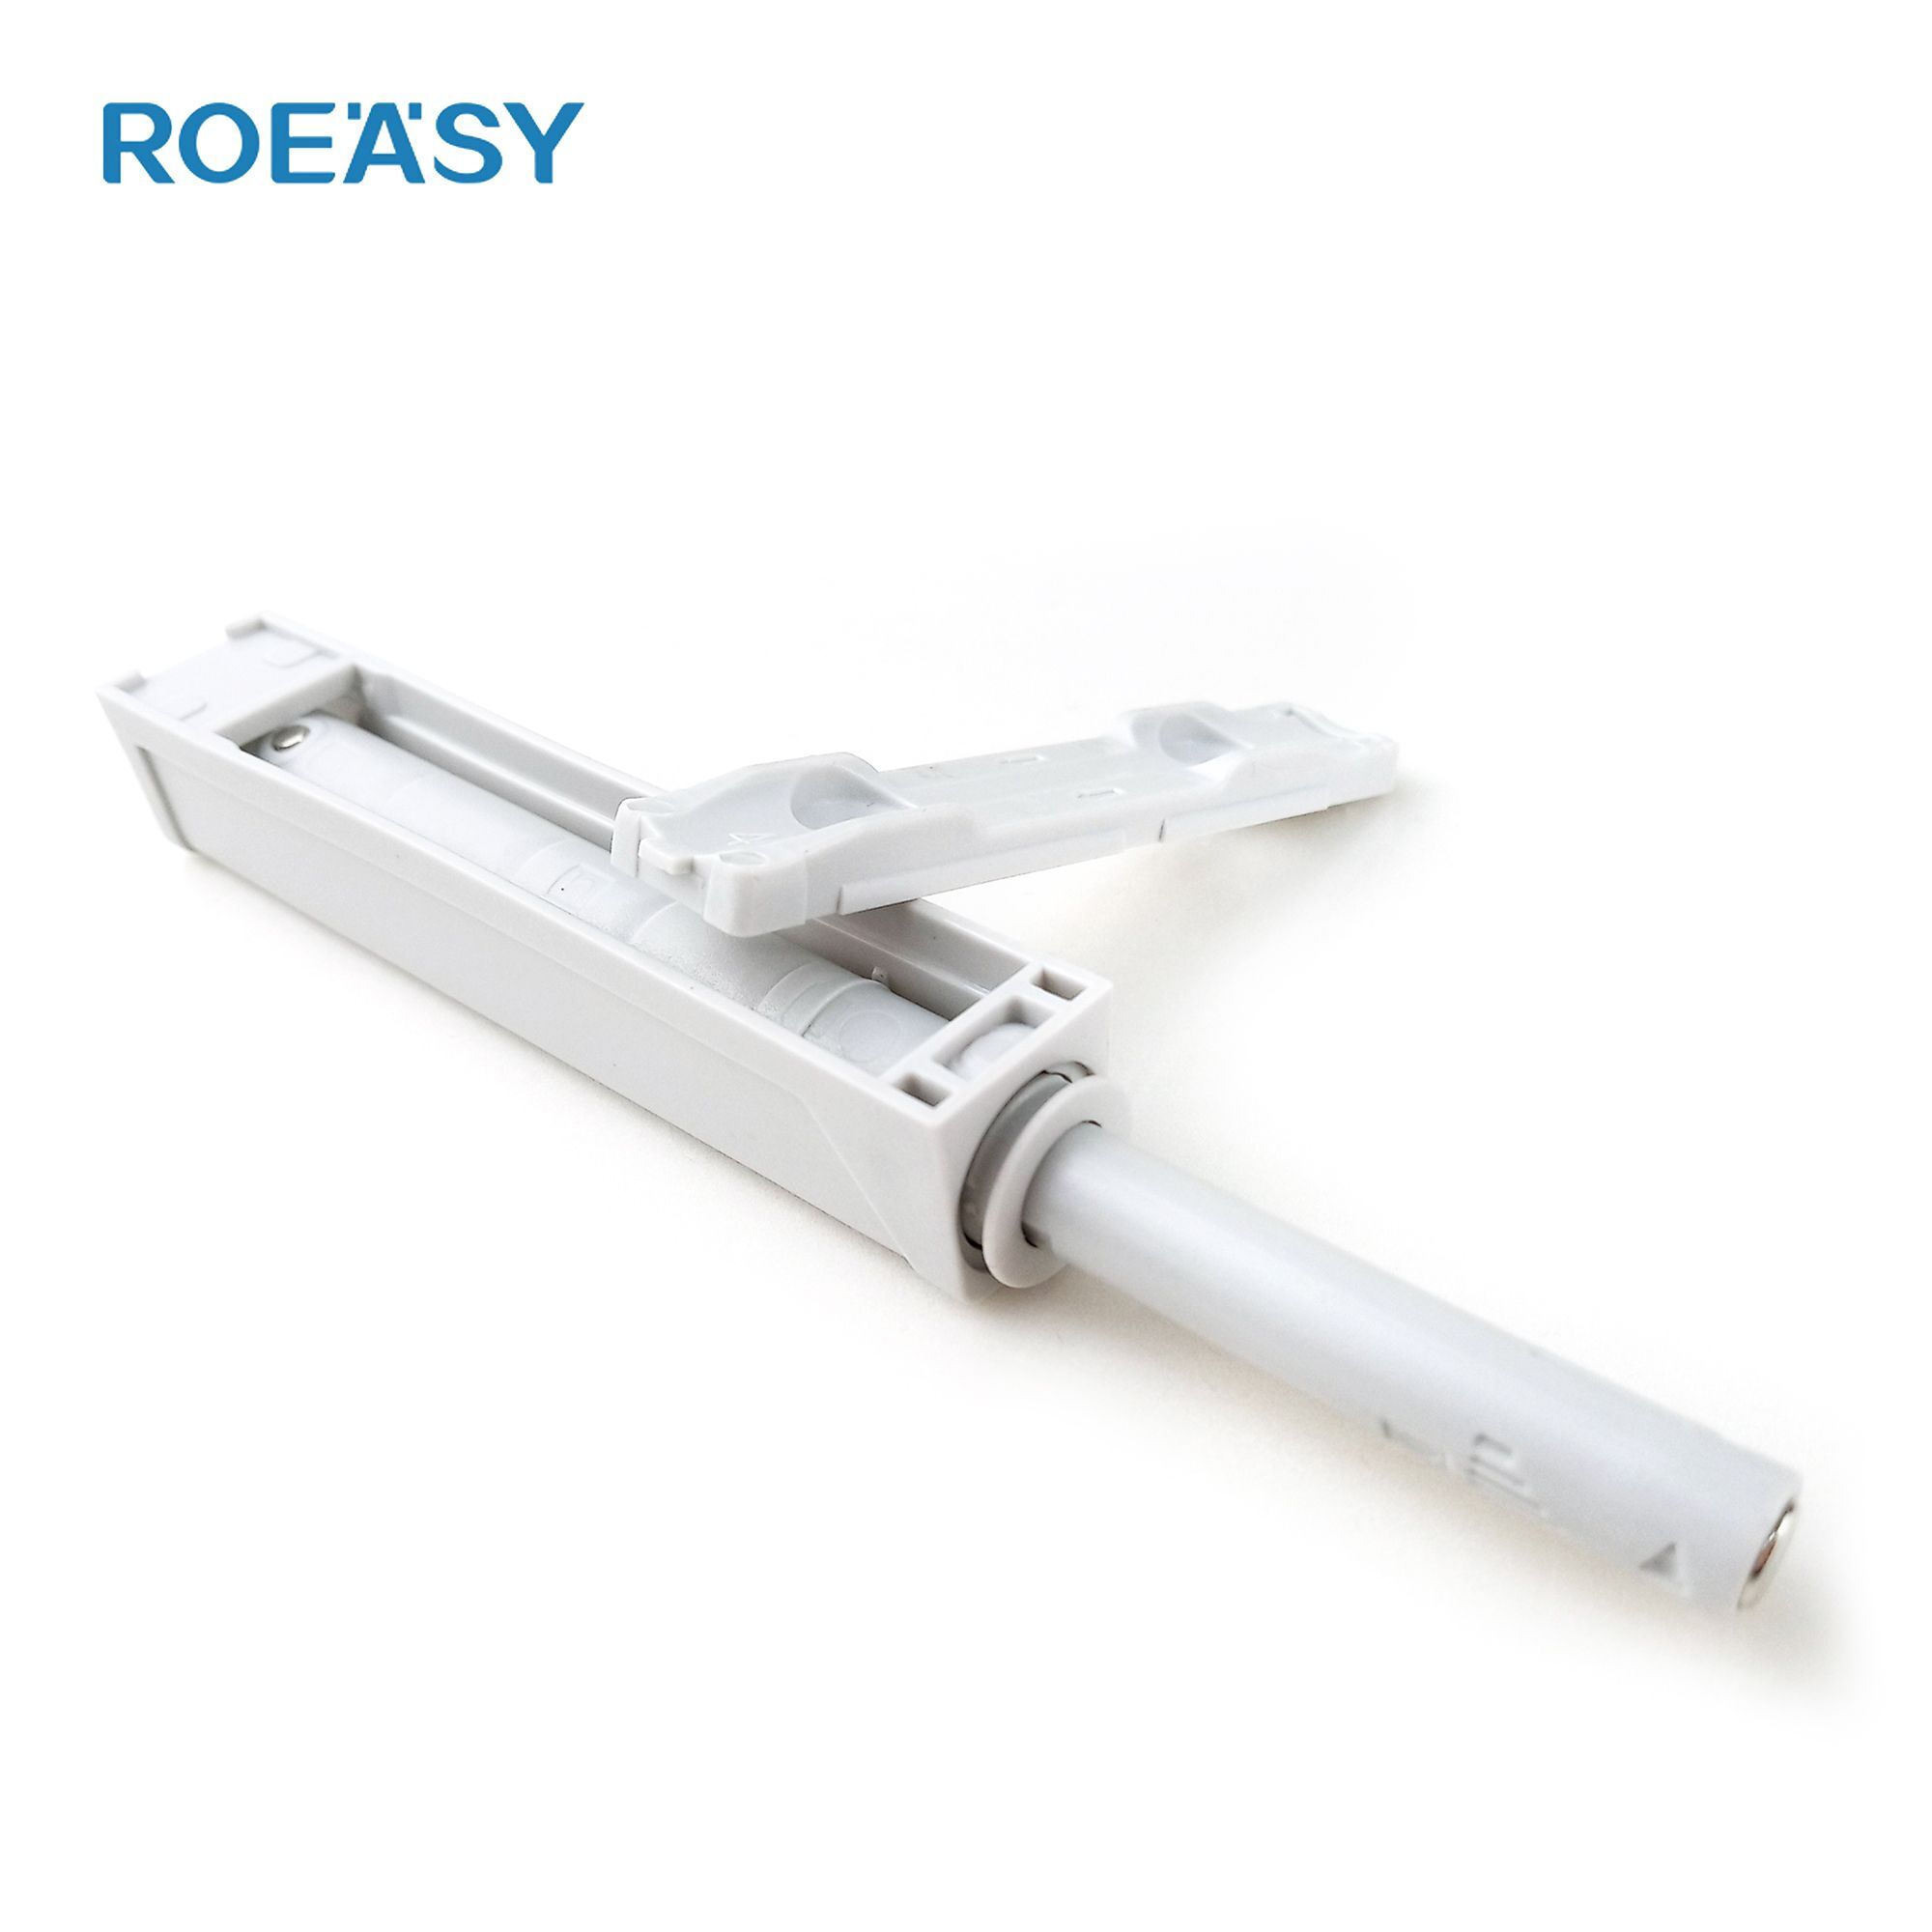 Roeasy RT007 Magnetic Catcher Push to Open System Cabinet Door Latches